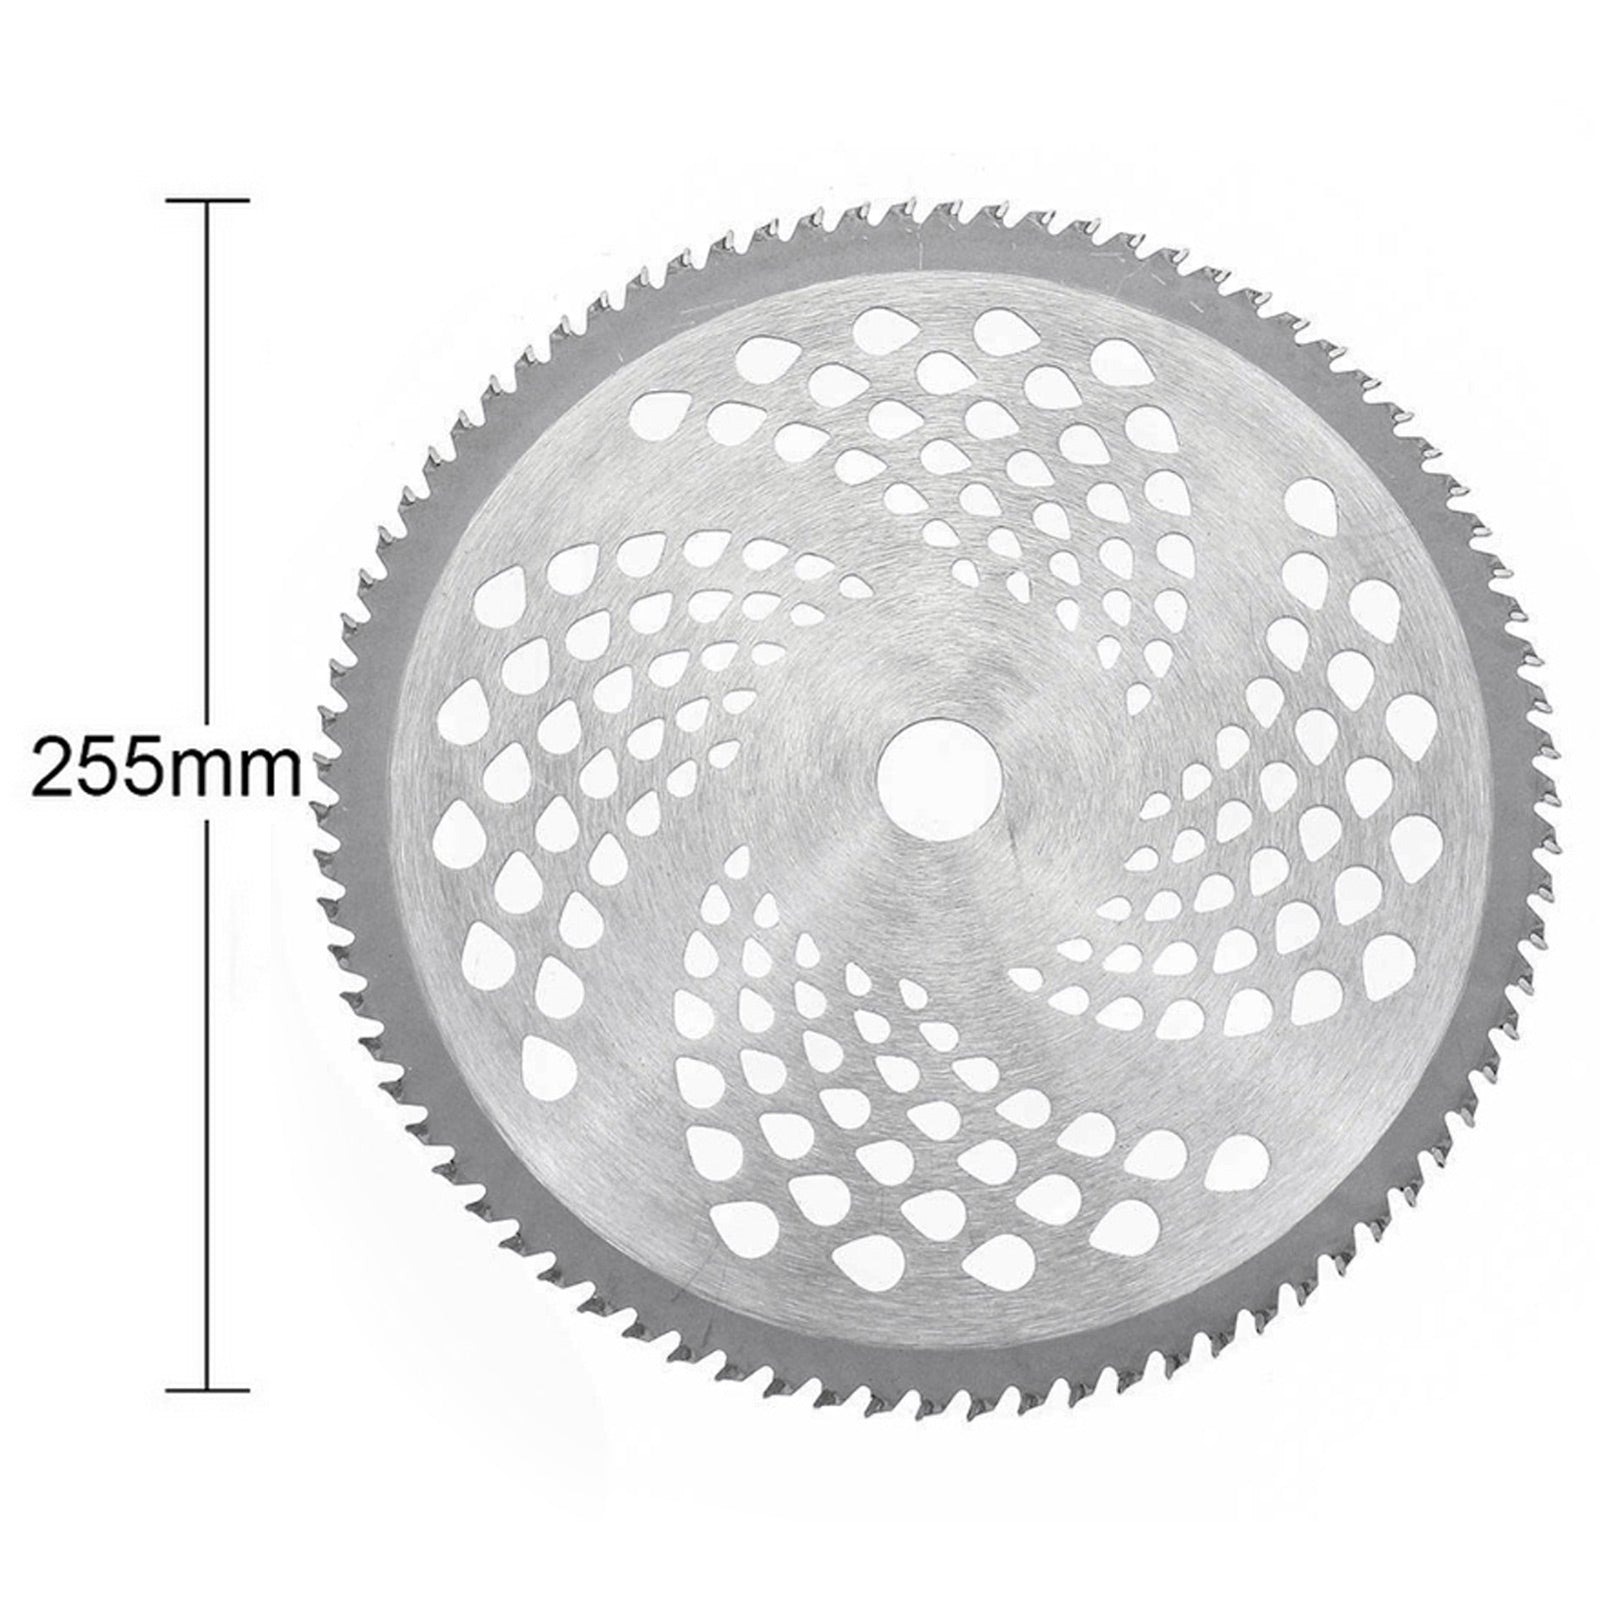 Circular Saw Blade for Efficient Grass Cutting - Durable and Versatile Cutting Accessory